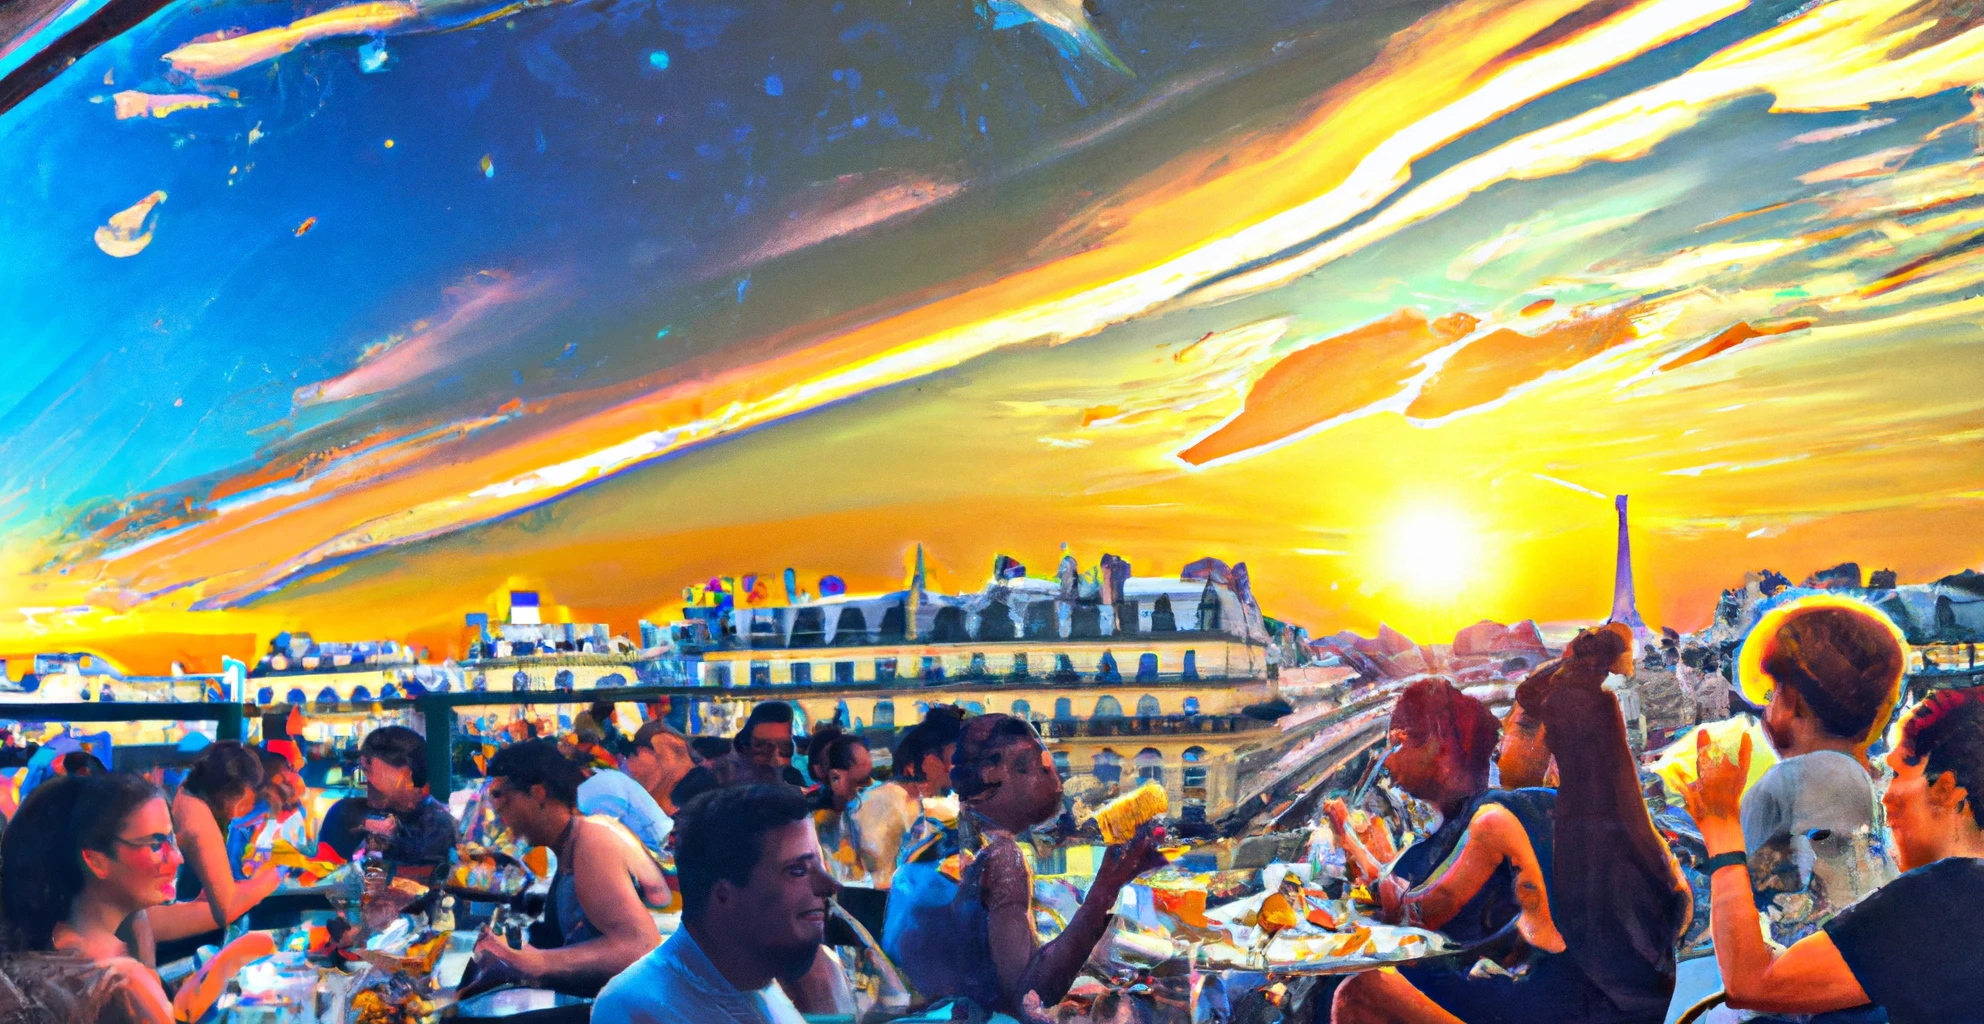 AI generate Digital Art of the skyline of Paris at sunset with people vloging in the foreground people eating food at restaurant terraces and street cafes